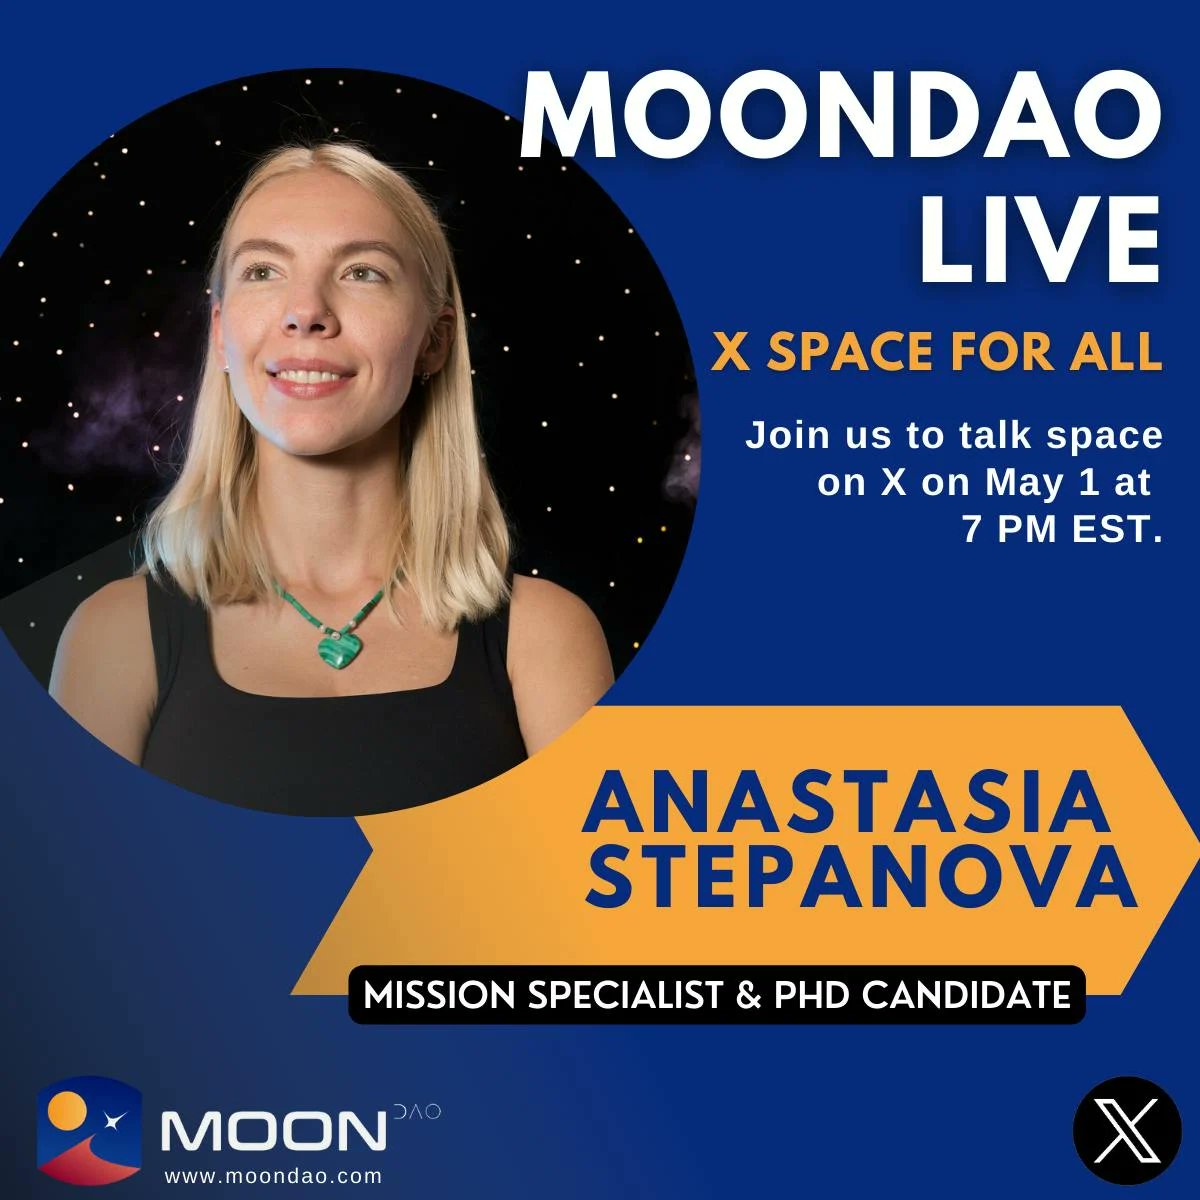 OfficialMoonDAO tweet picture